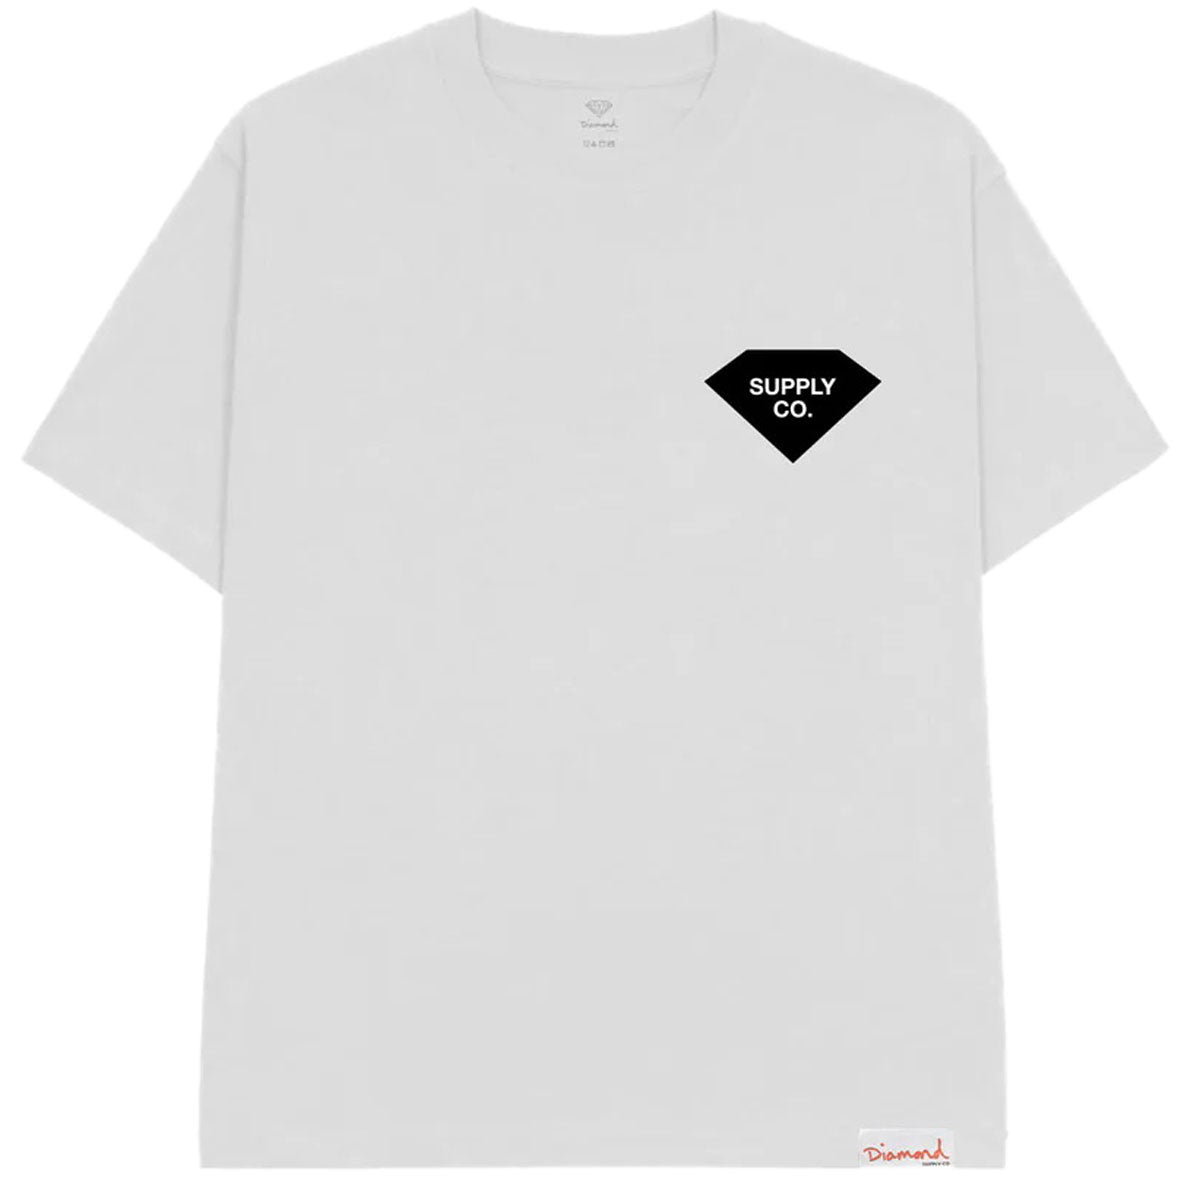 Diamond Supply Co. Silhouette Supply Co. T-Shirt - White image 1